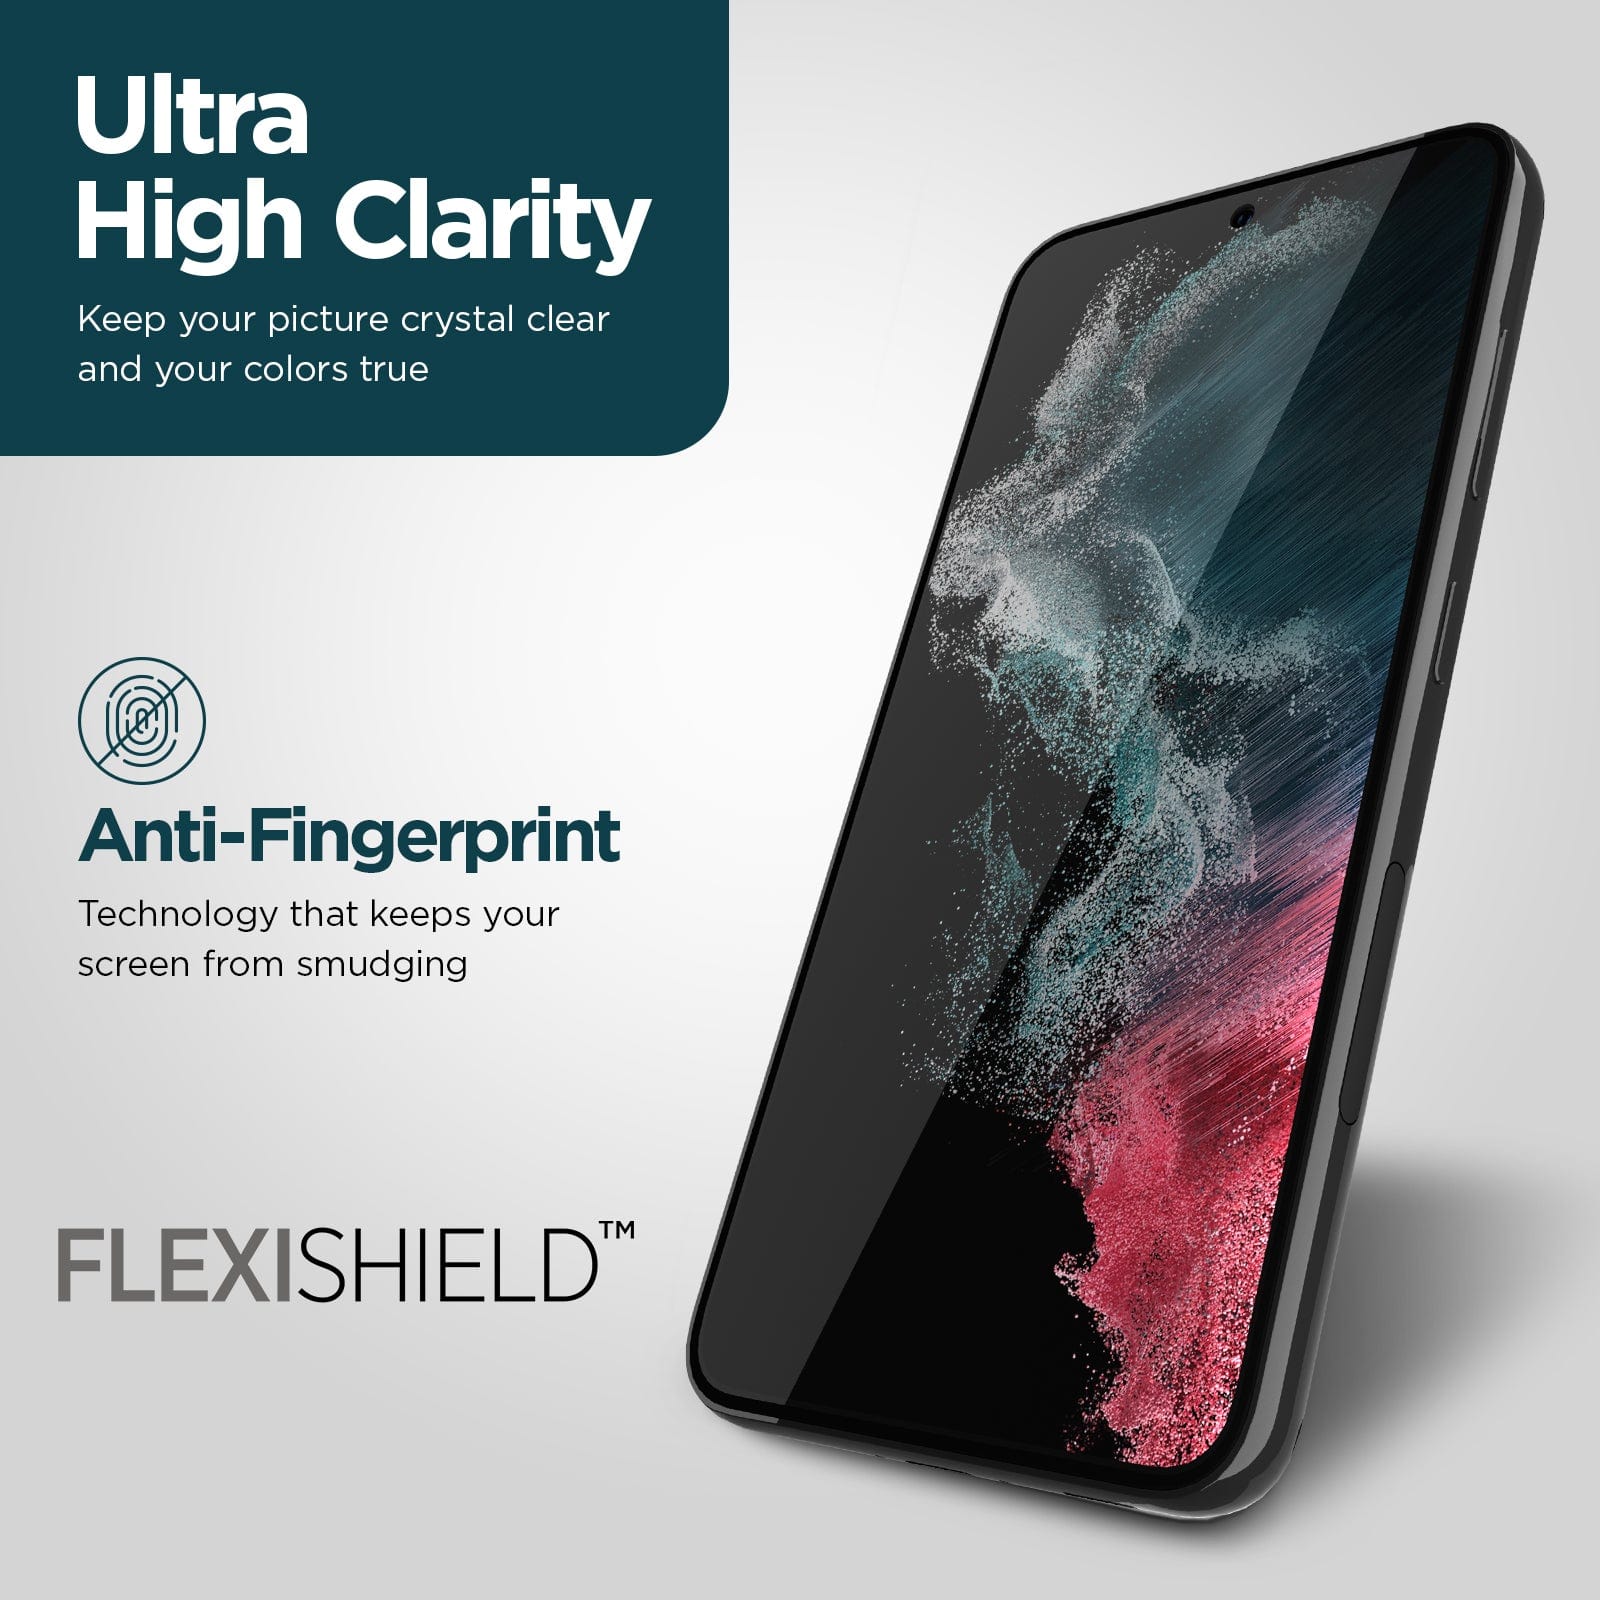 ULTRA HIGH CLARITY. KEEP YOUR PICTURE CRYSTAL CLEAR AND YOUR COLORS TRUE. ANTI-FINGERPRINT TECHNOLOGY THAT KEEPS YOUR SCREEN FROM SMUDGING. FLEXISHIELD. 